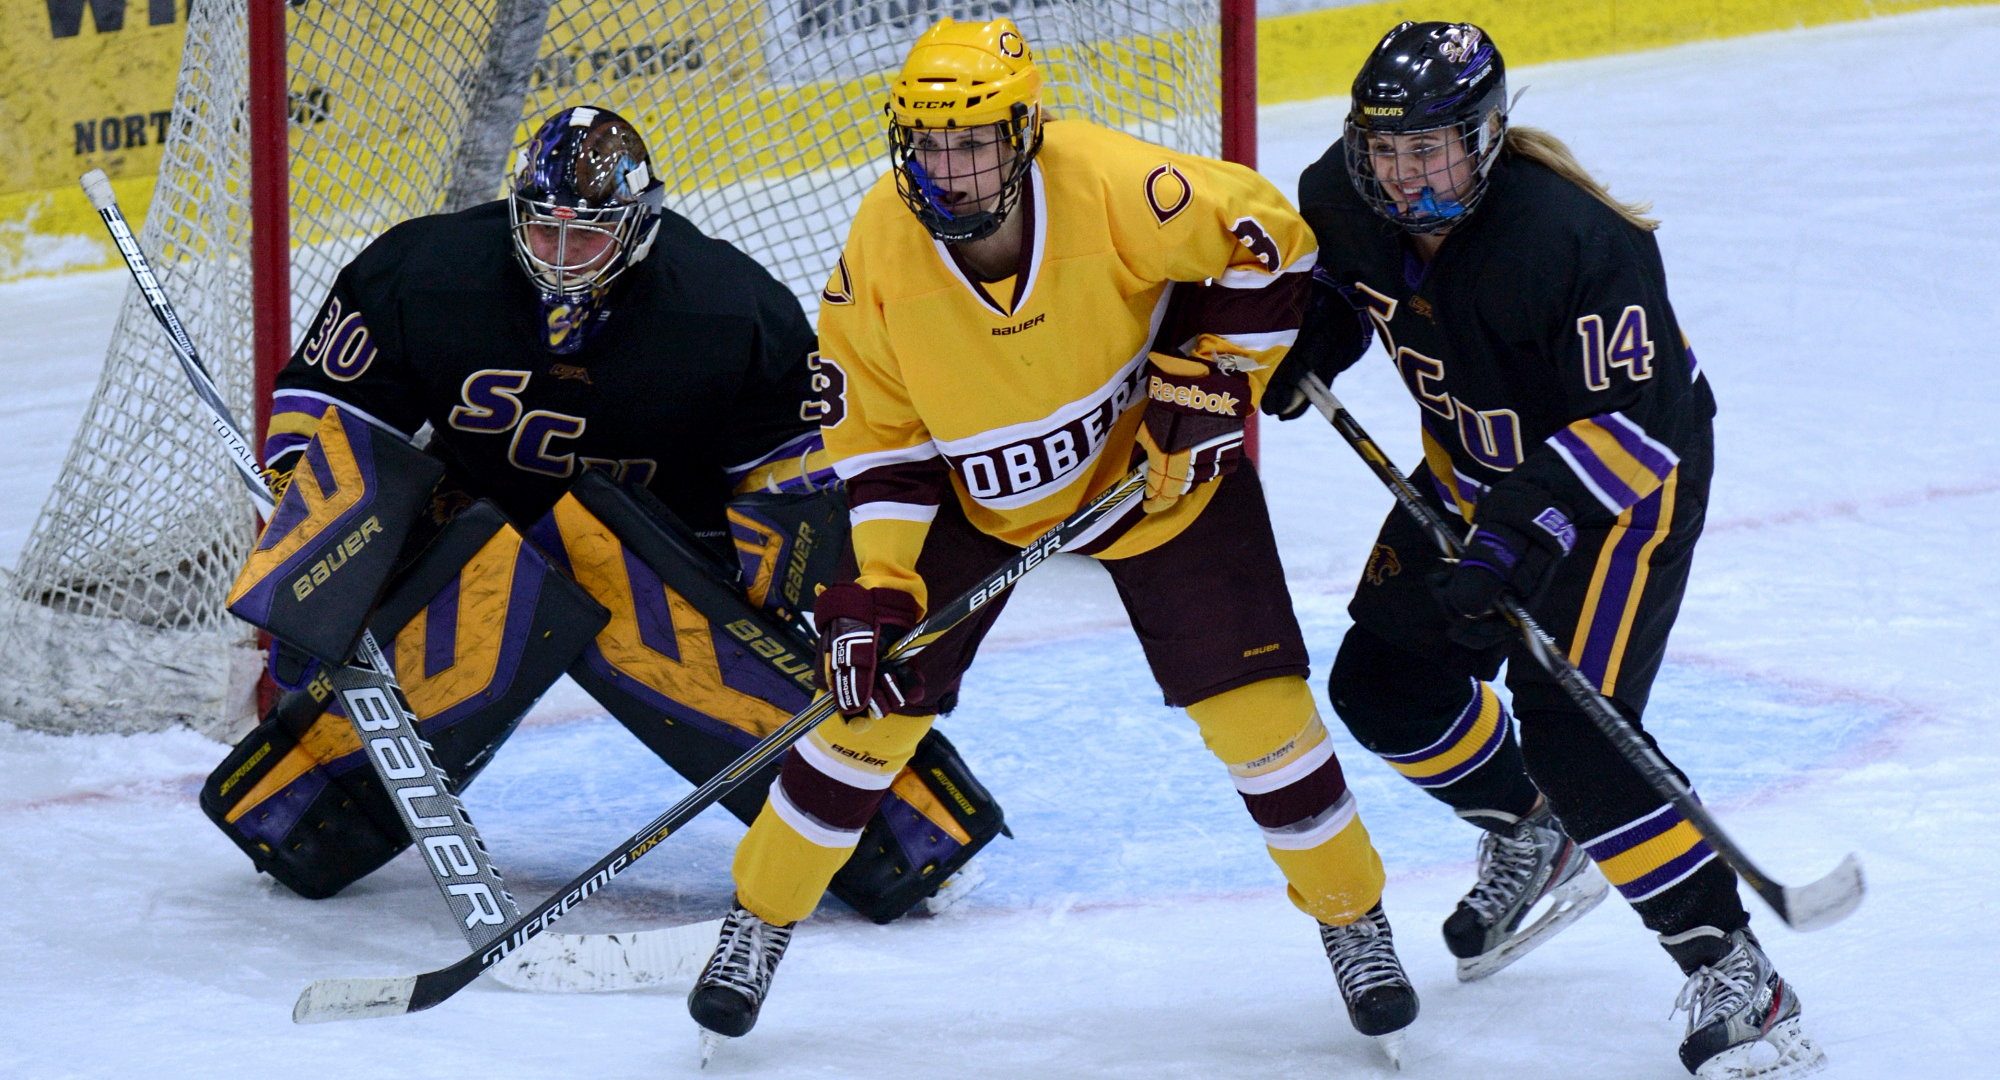 Senior Ellen Rethwisch had one of the two Cobber goals in the team's first loss of the year at St. Catherine.